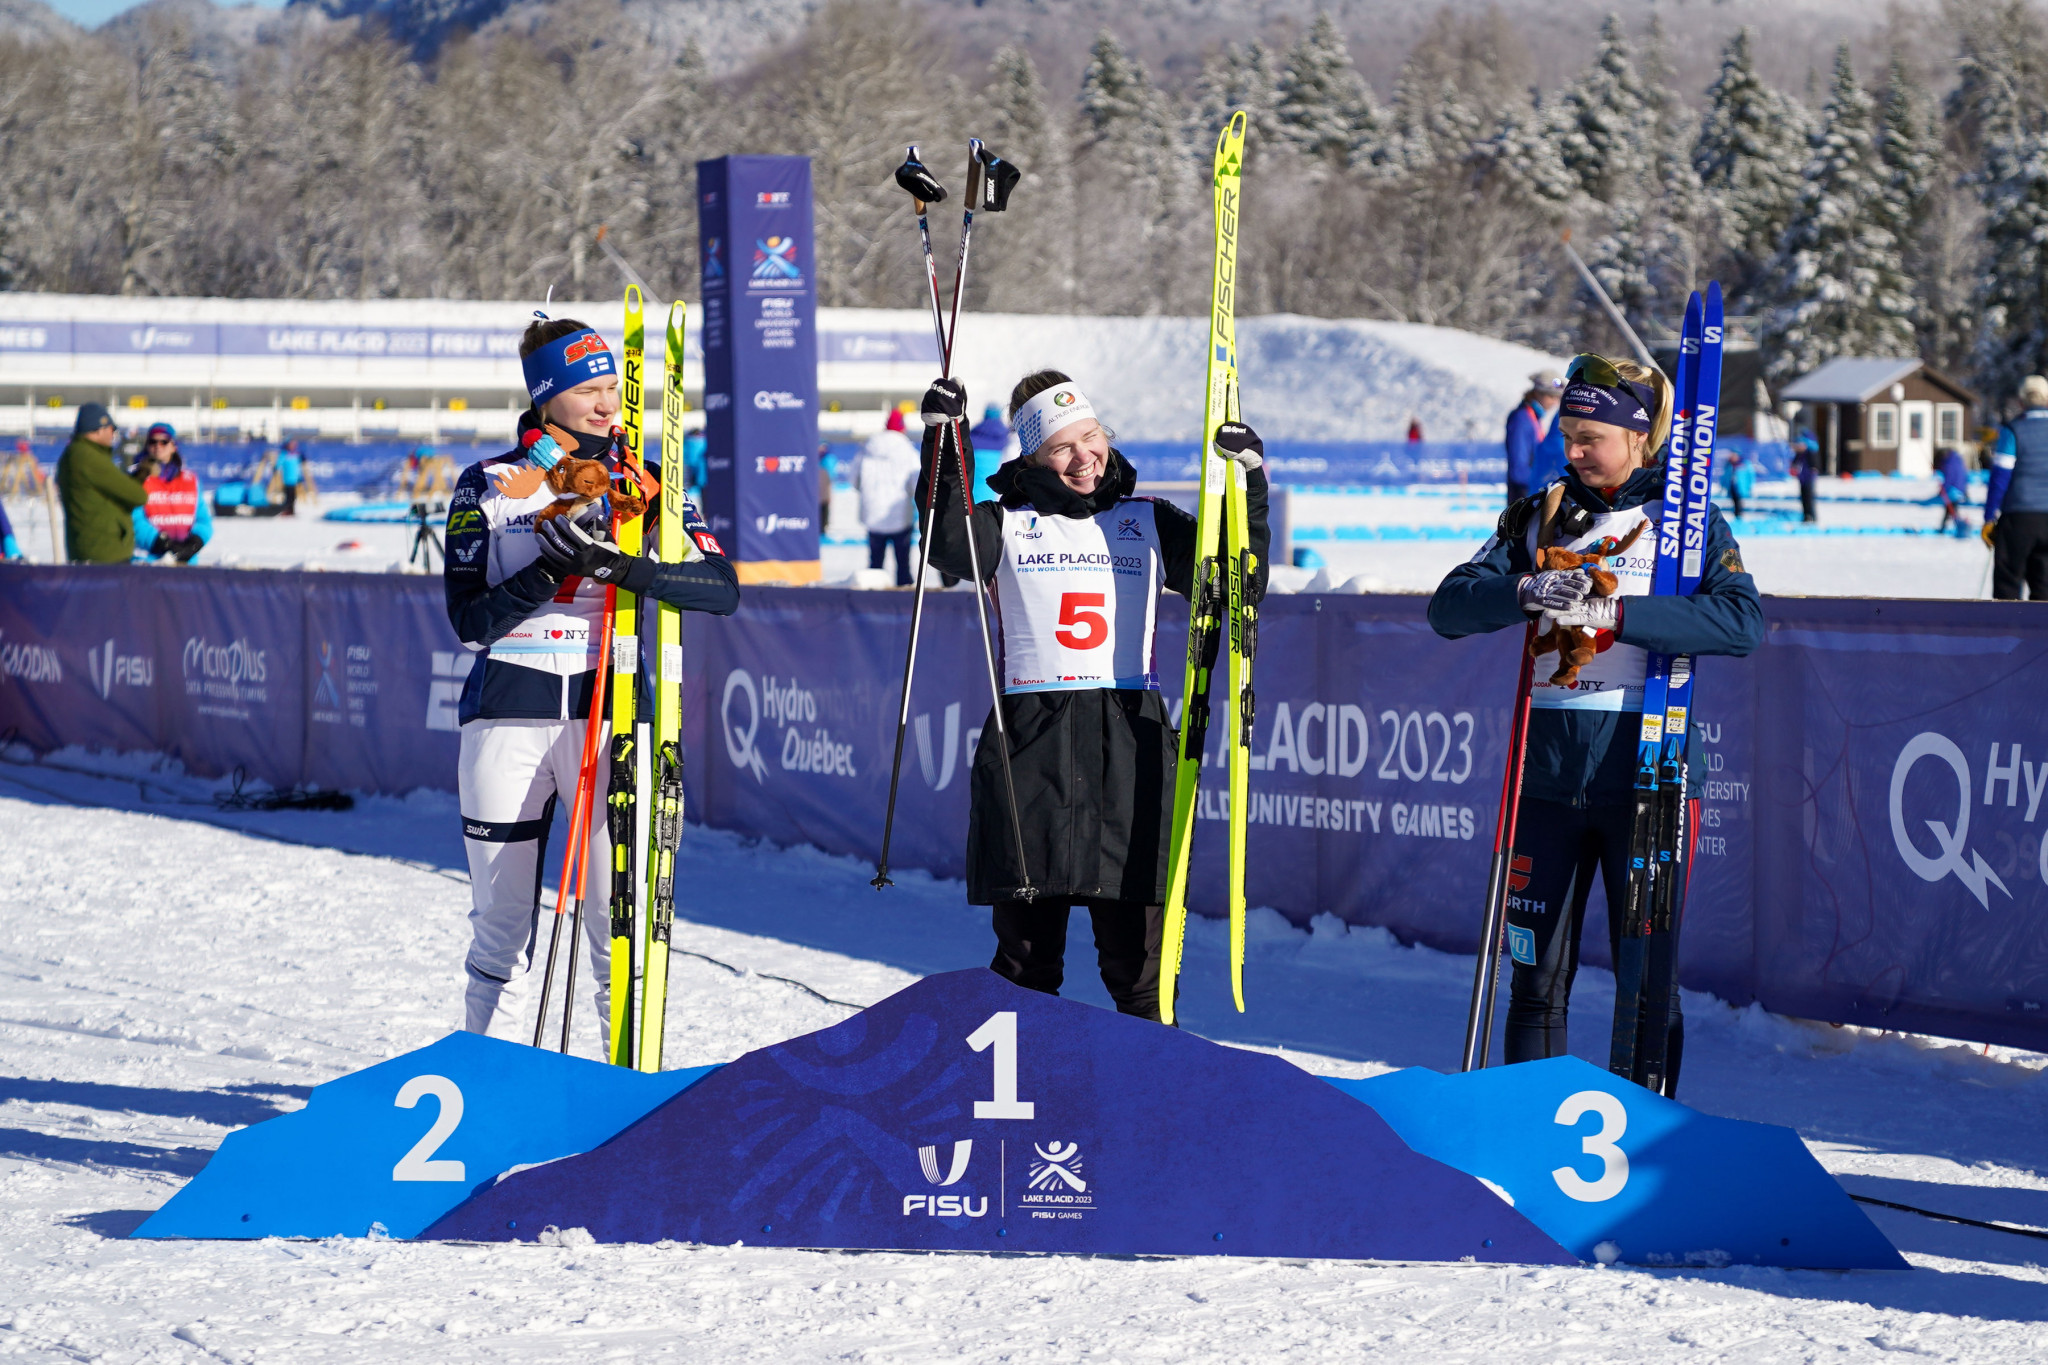 Pulles and Olkkonen were then joined on the women's podium by Germany's Anna-Maria Dietze in third, right ©FISU